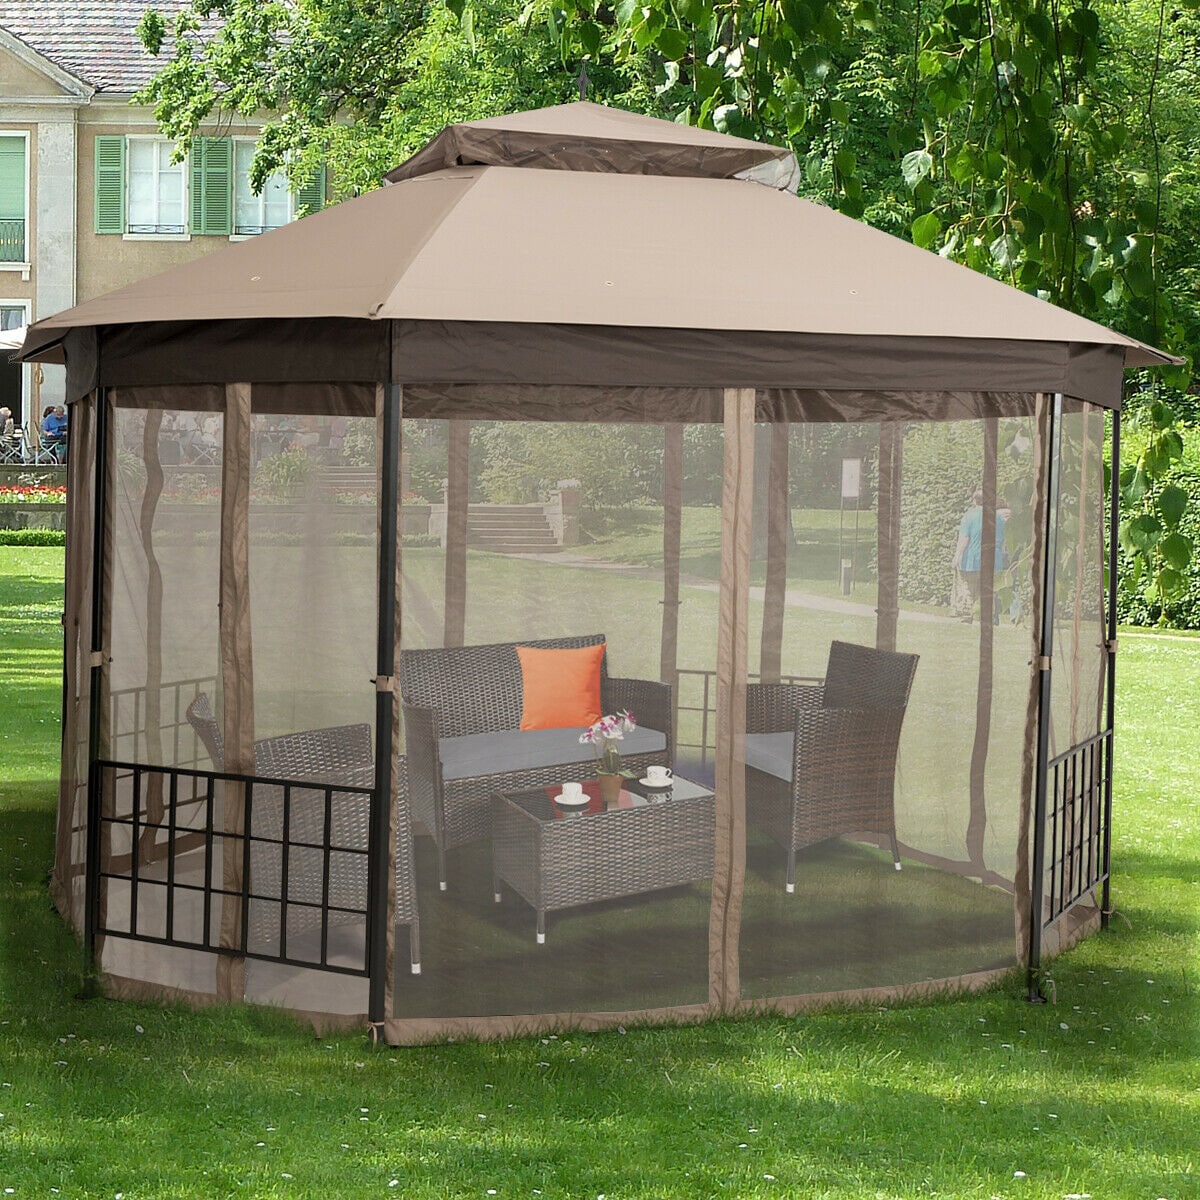 Lowe's End Of Summer Patio Clearance - Pergola with Canopy $398 (Retail  $598) - My DFW Mommy